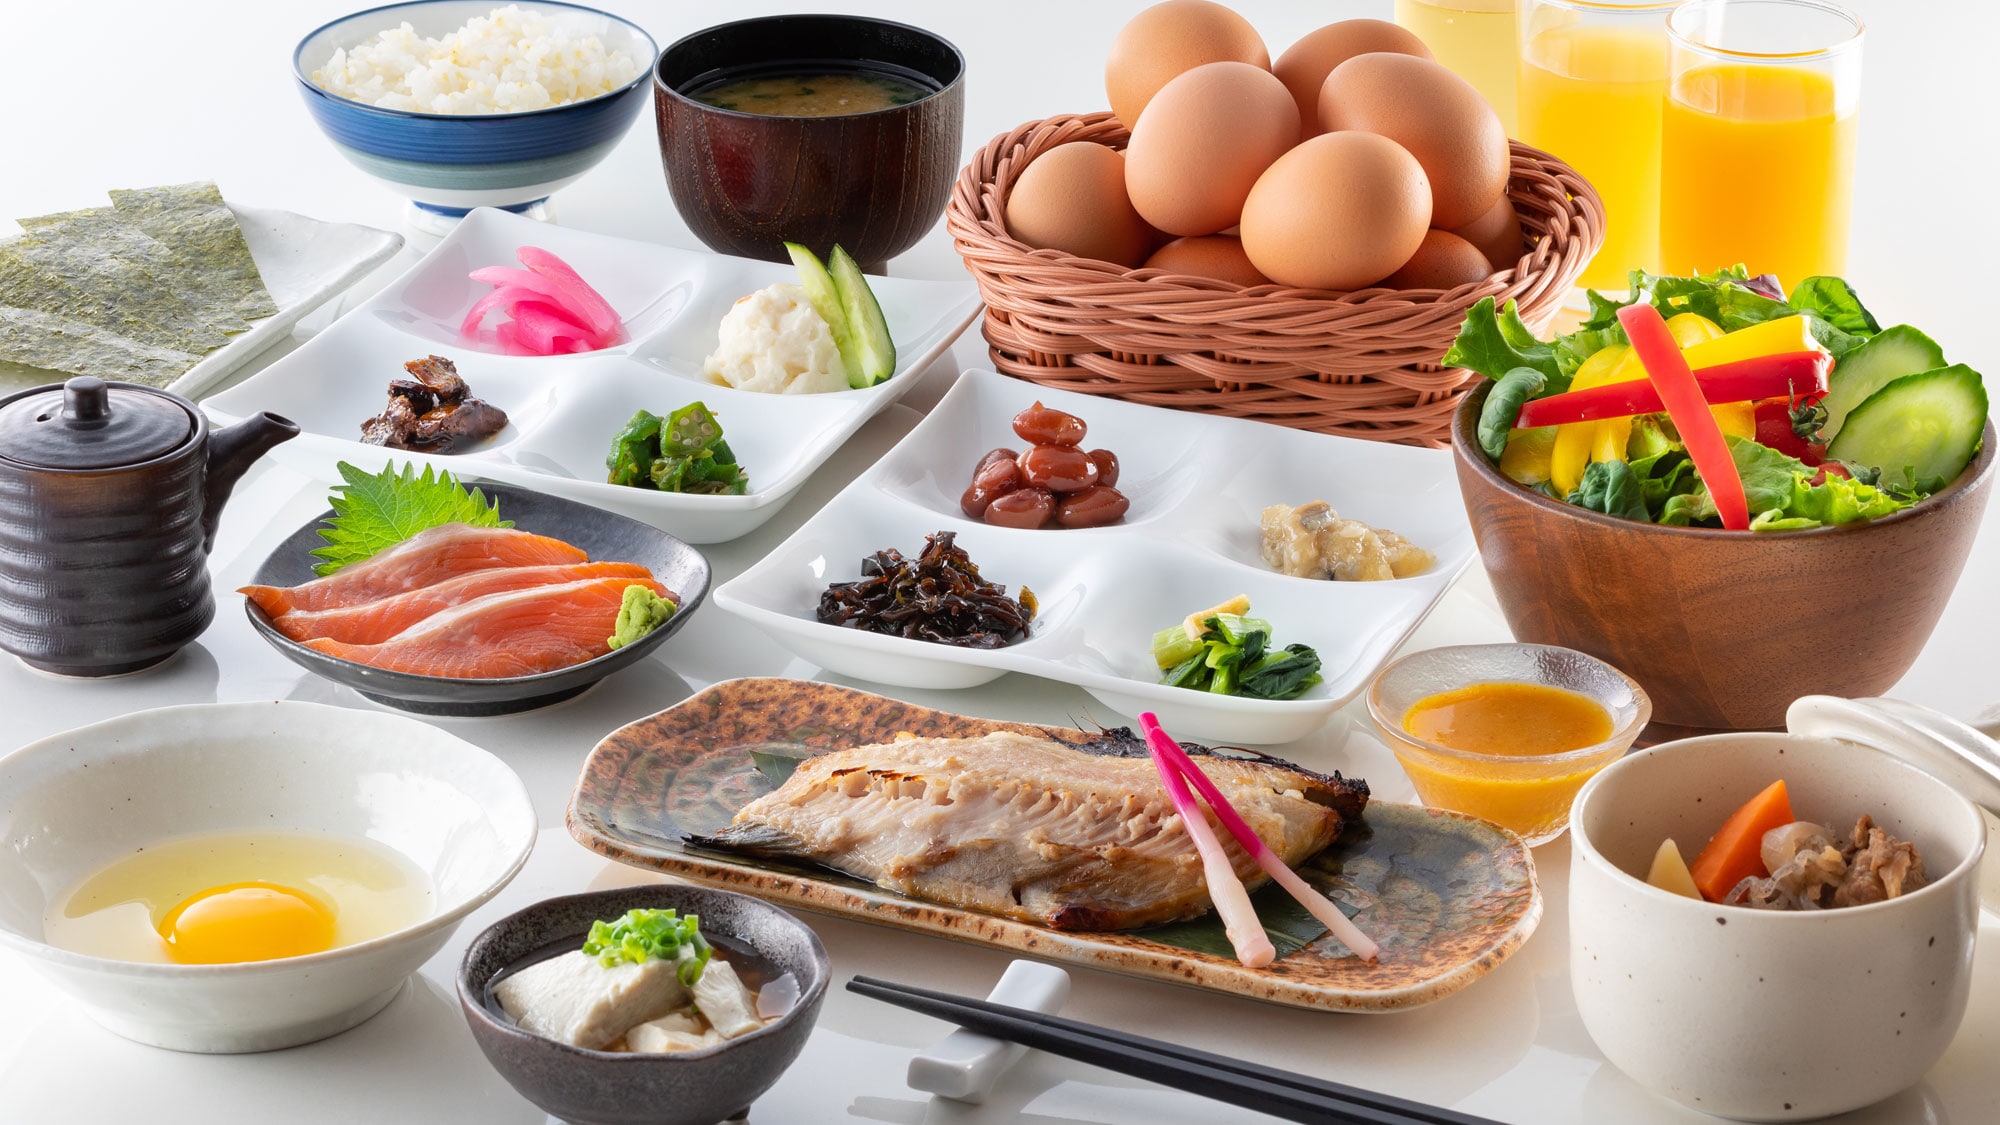 [Breakfast example] A Japanese set that is kind to the body